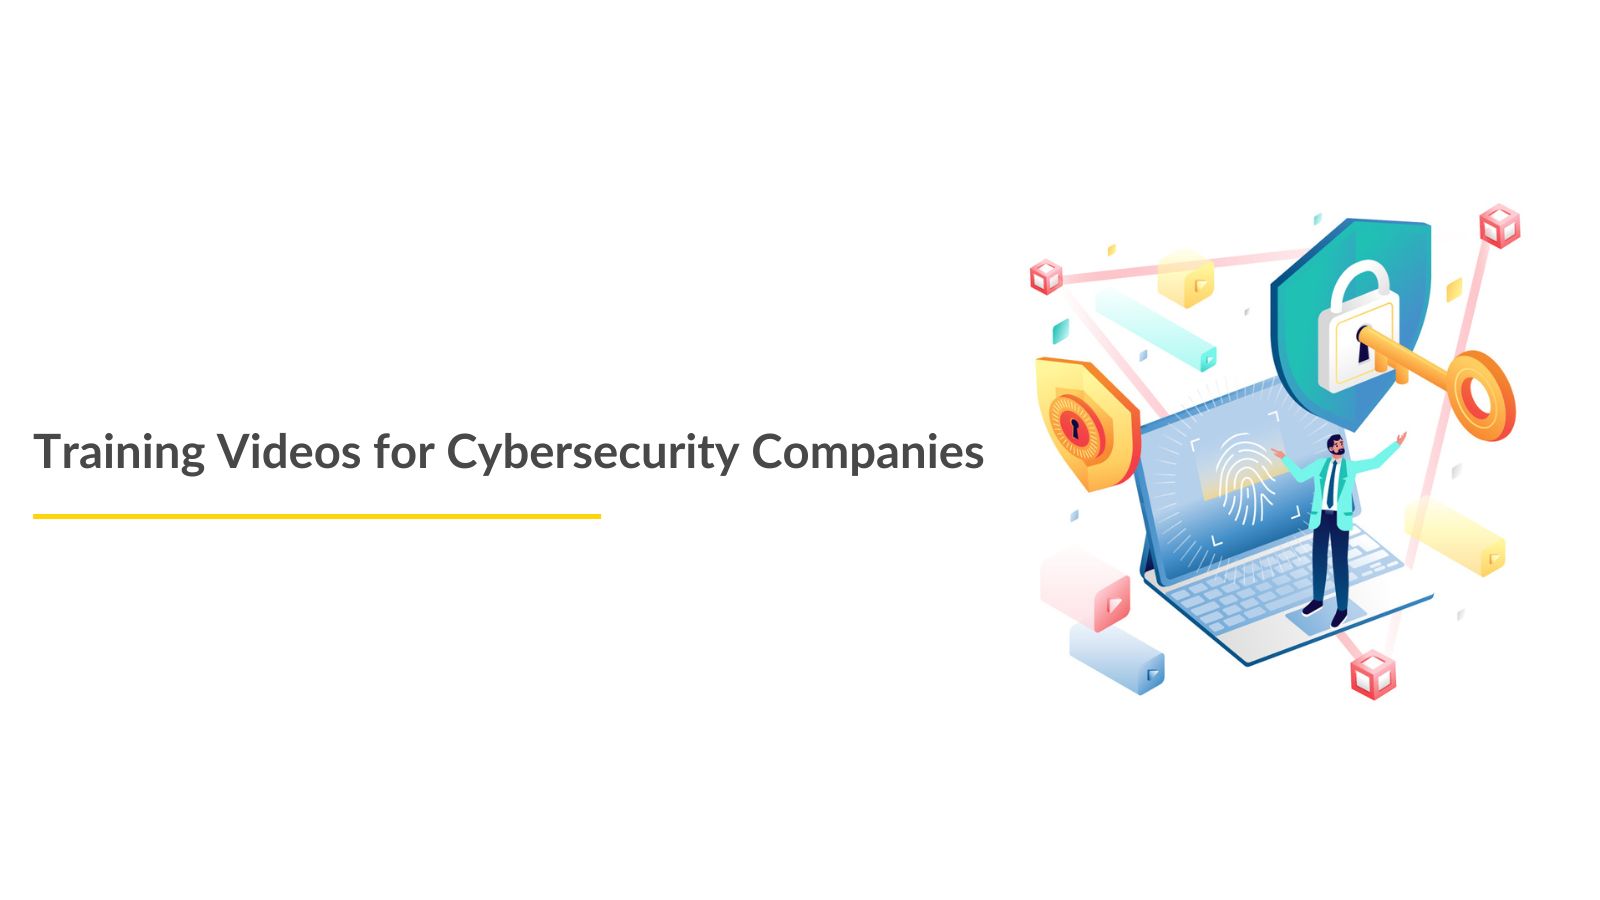 Training Videos for Cybersecurity Companies